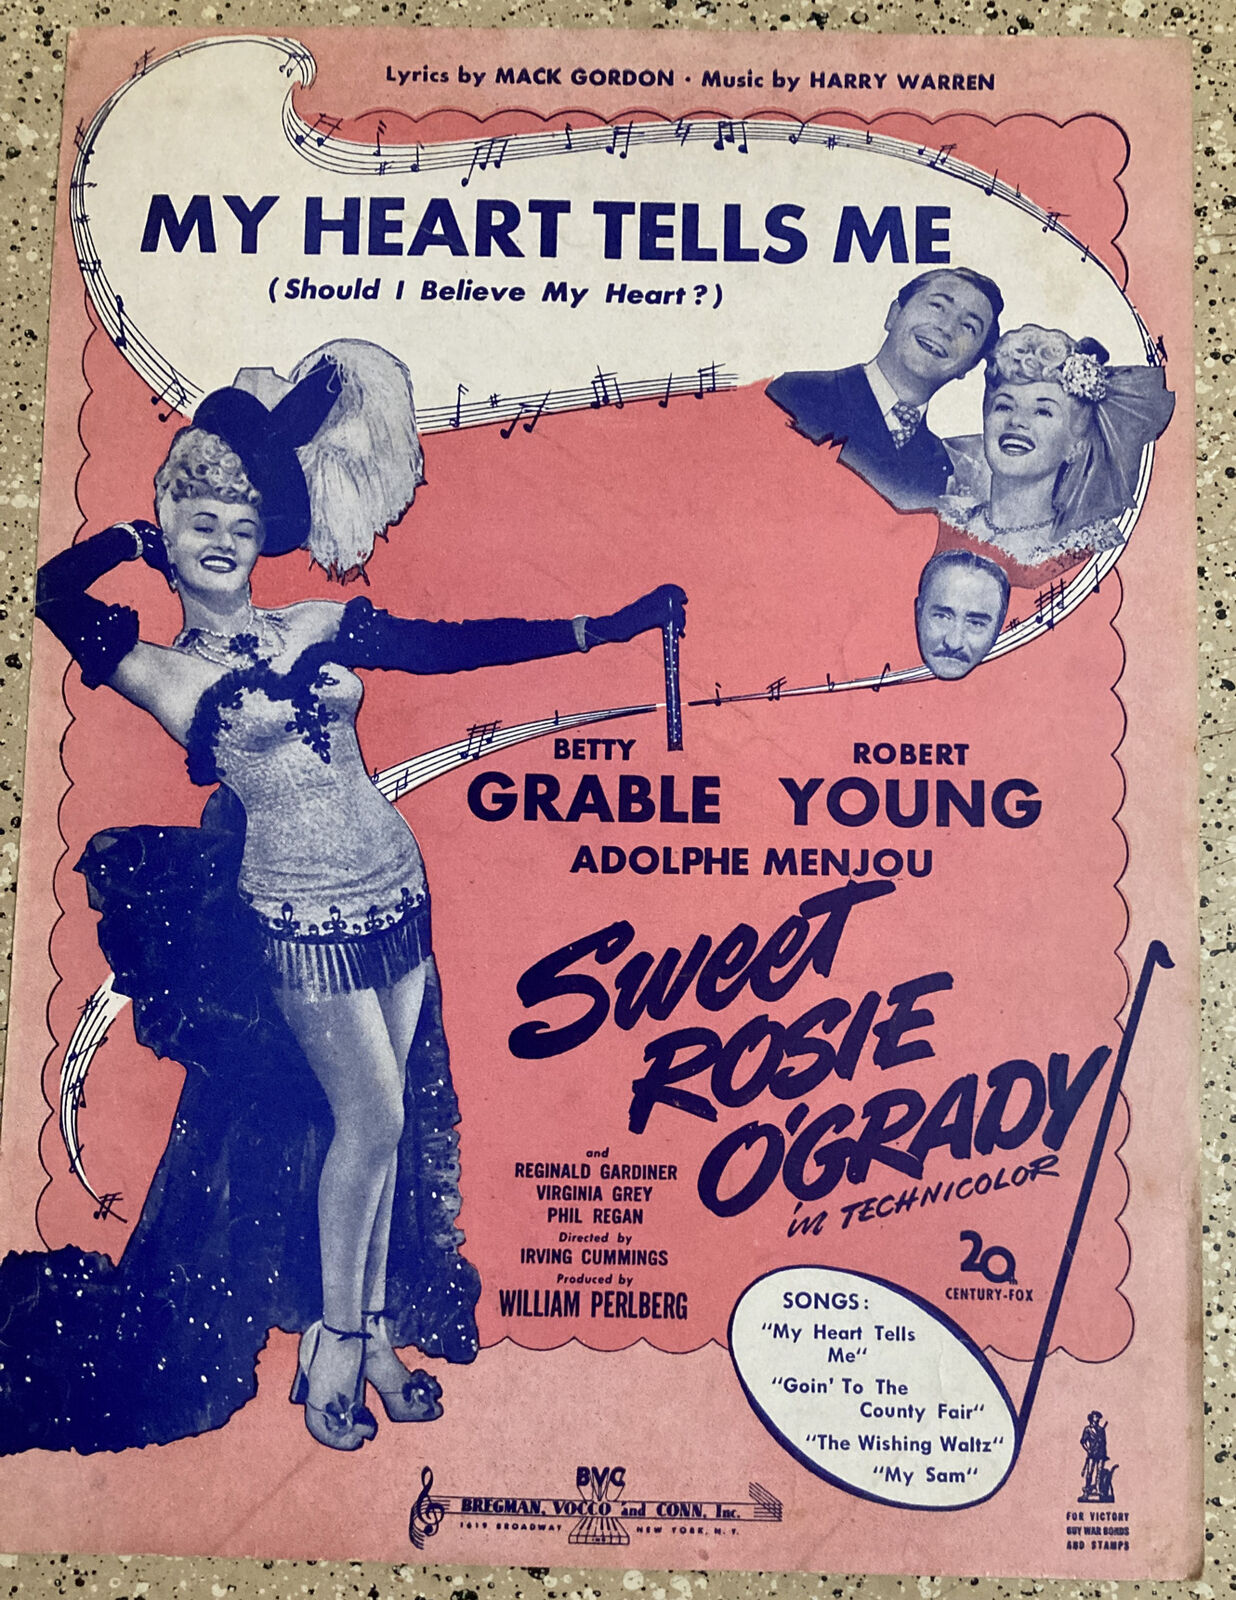 VINTAGE SHEET MUSIC MY HEART TELLS ME BETTY GRABLE ROBERT YOUNG SHOULD I BELIEVE